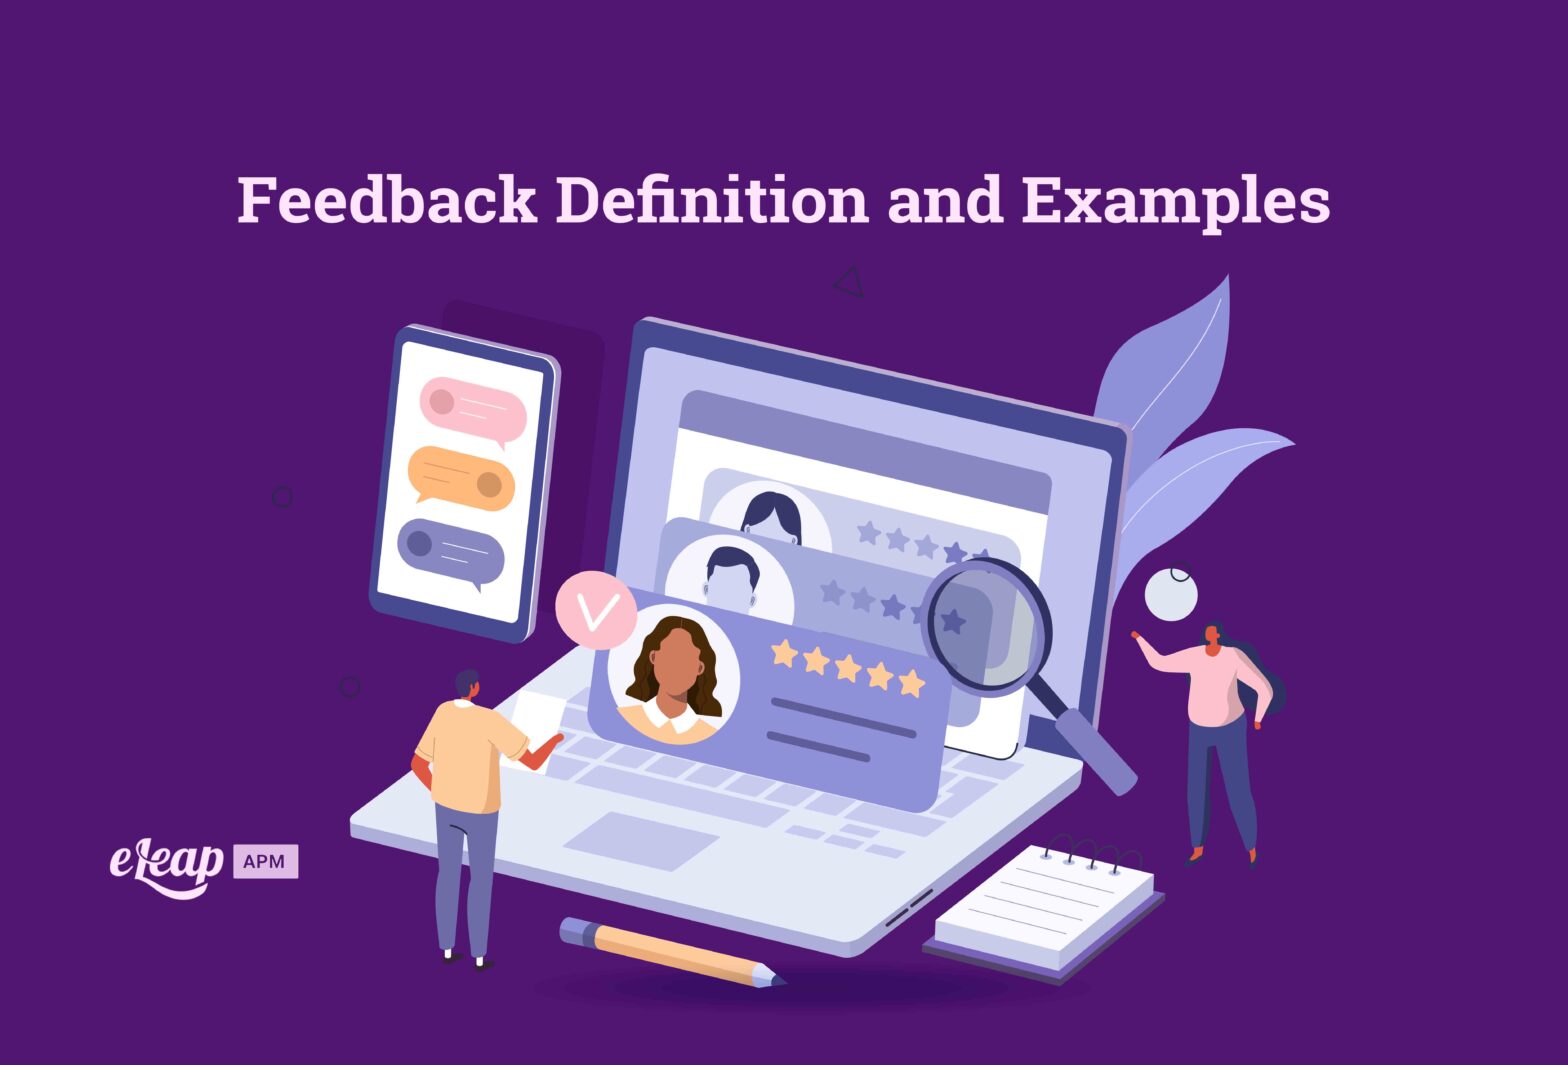 feedback-definition-and-examples-eleap